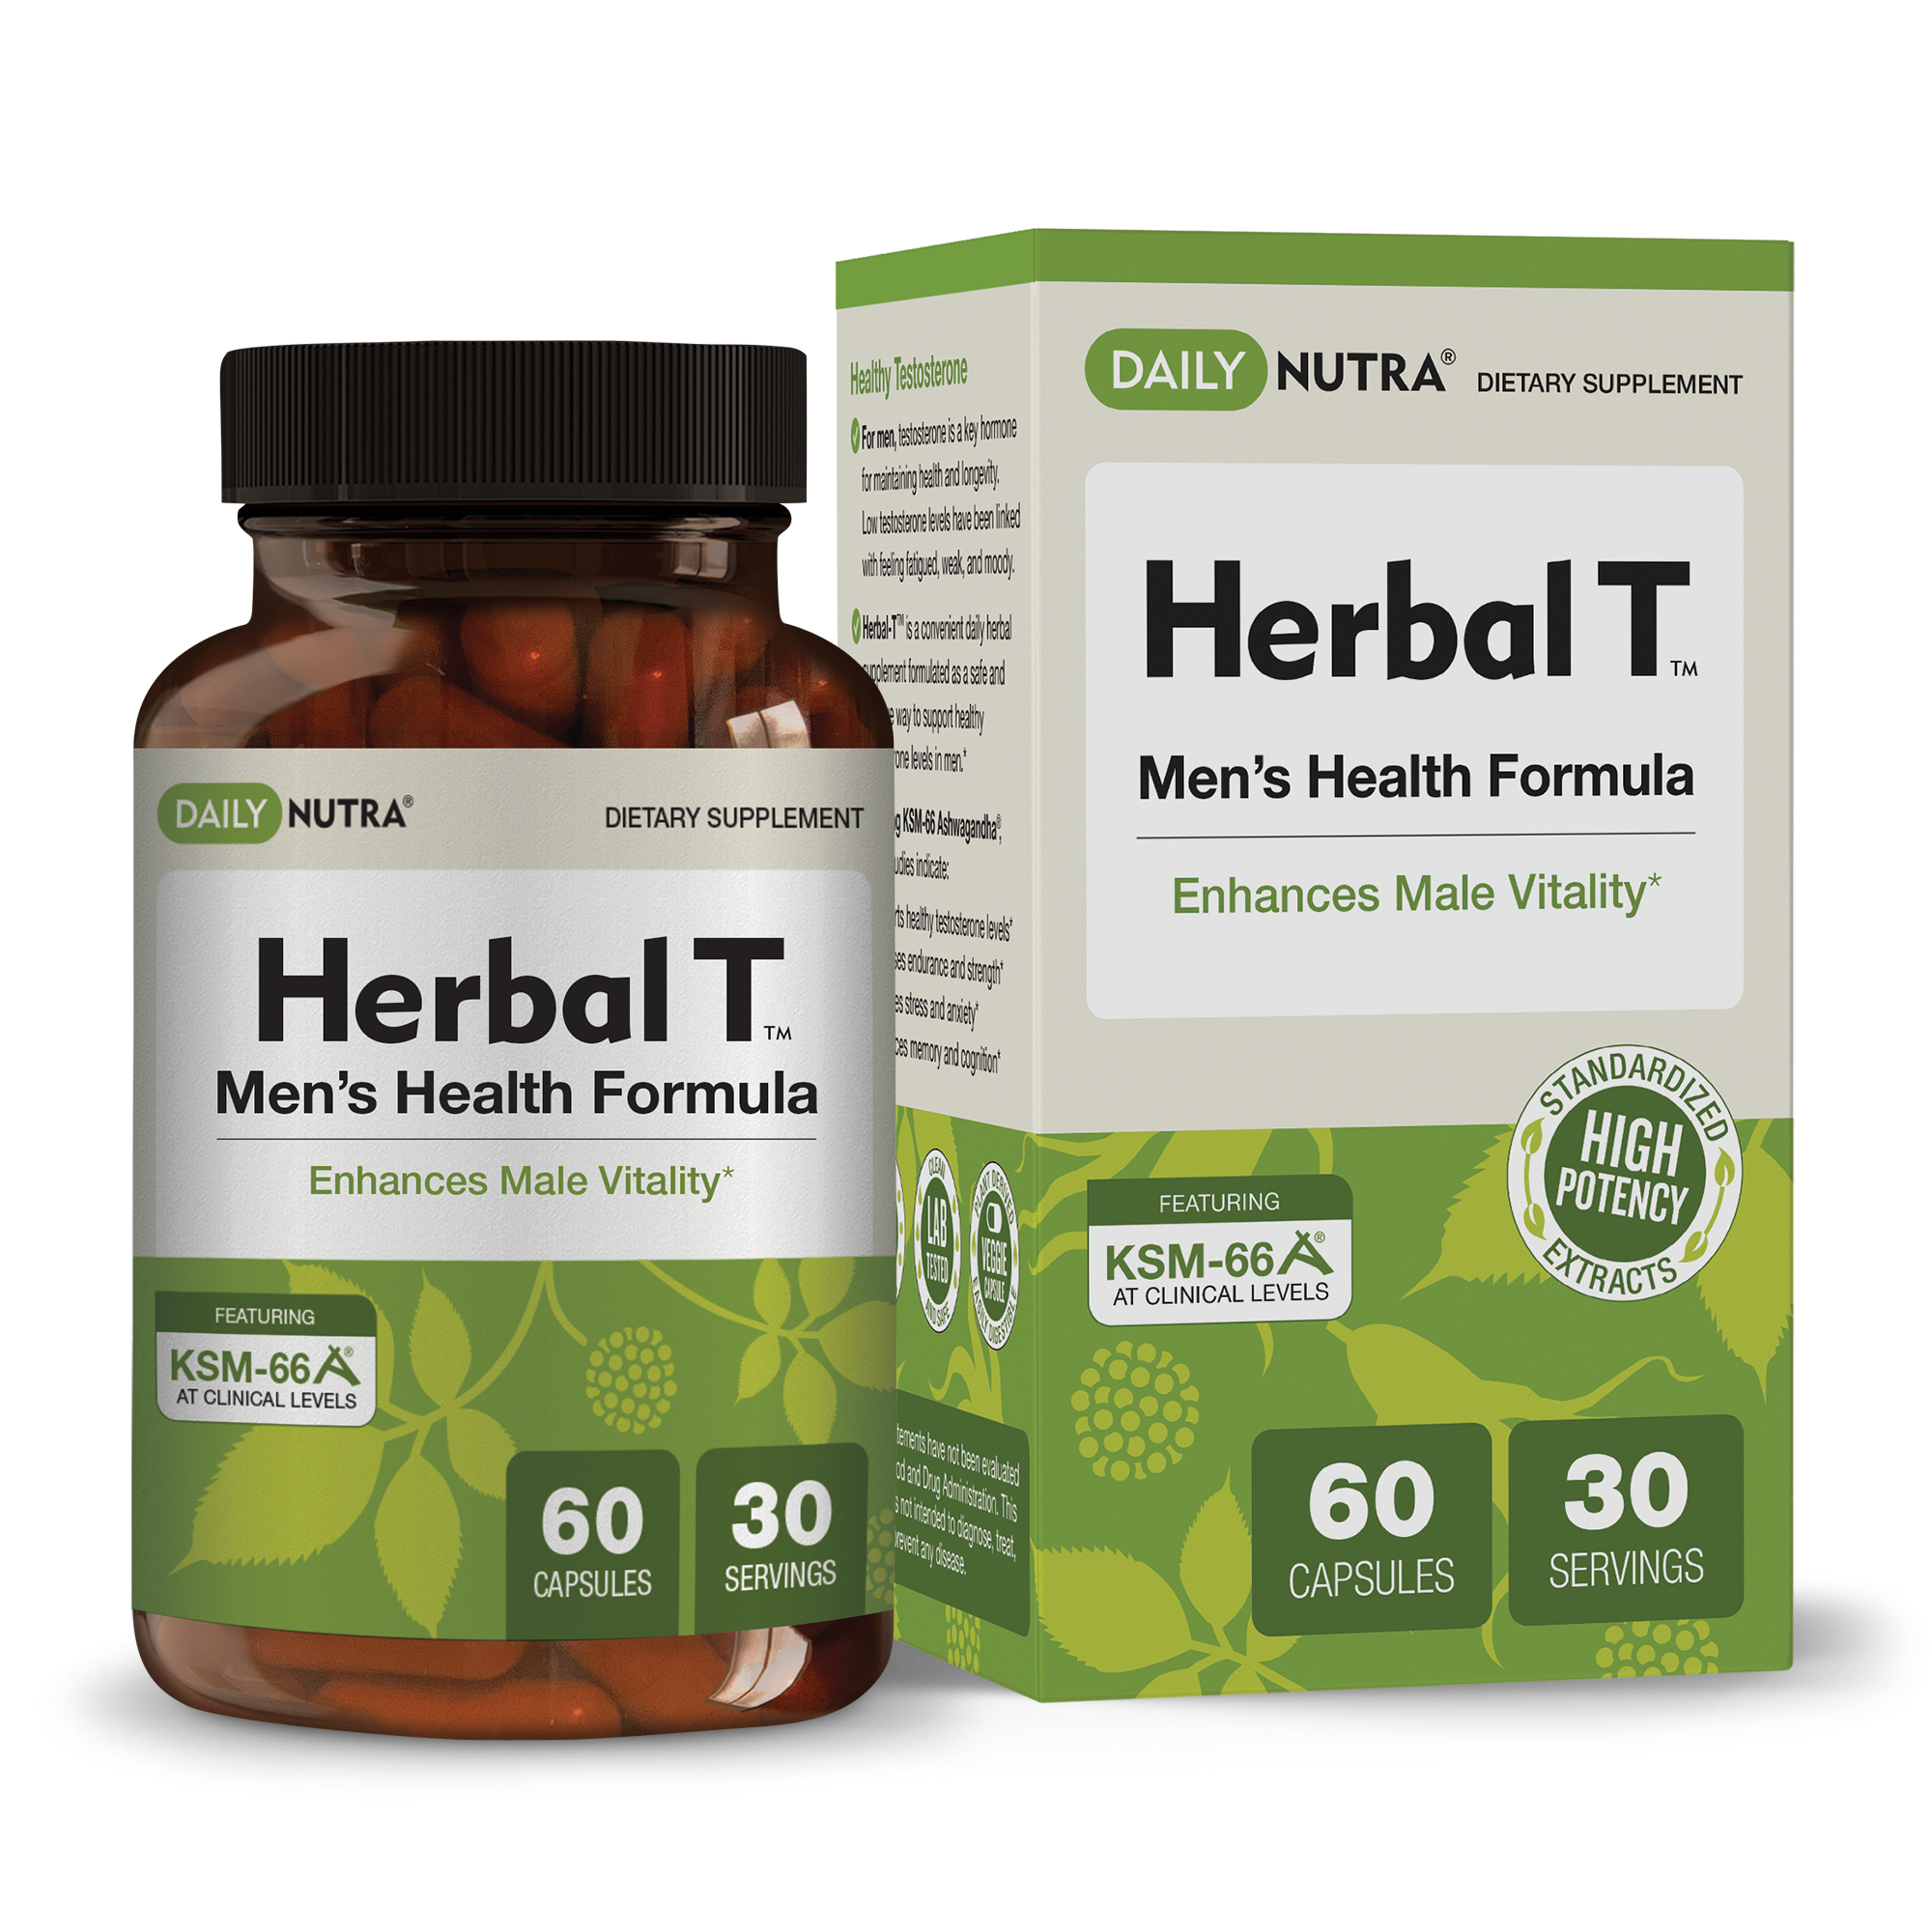 Herbal T Natural Testosterone Booster